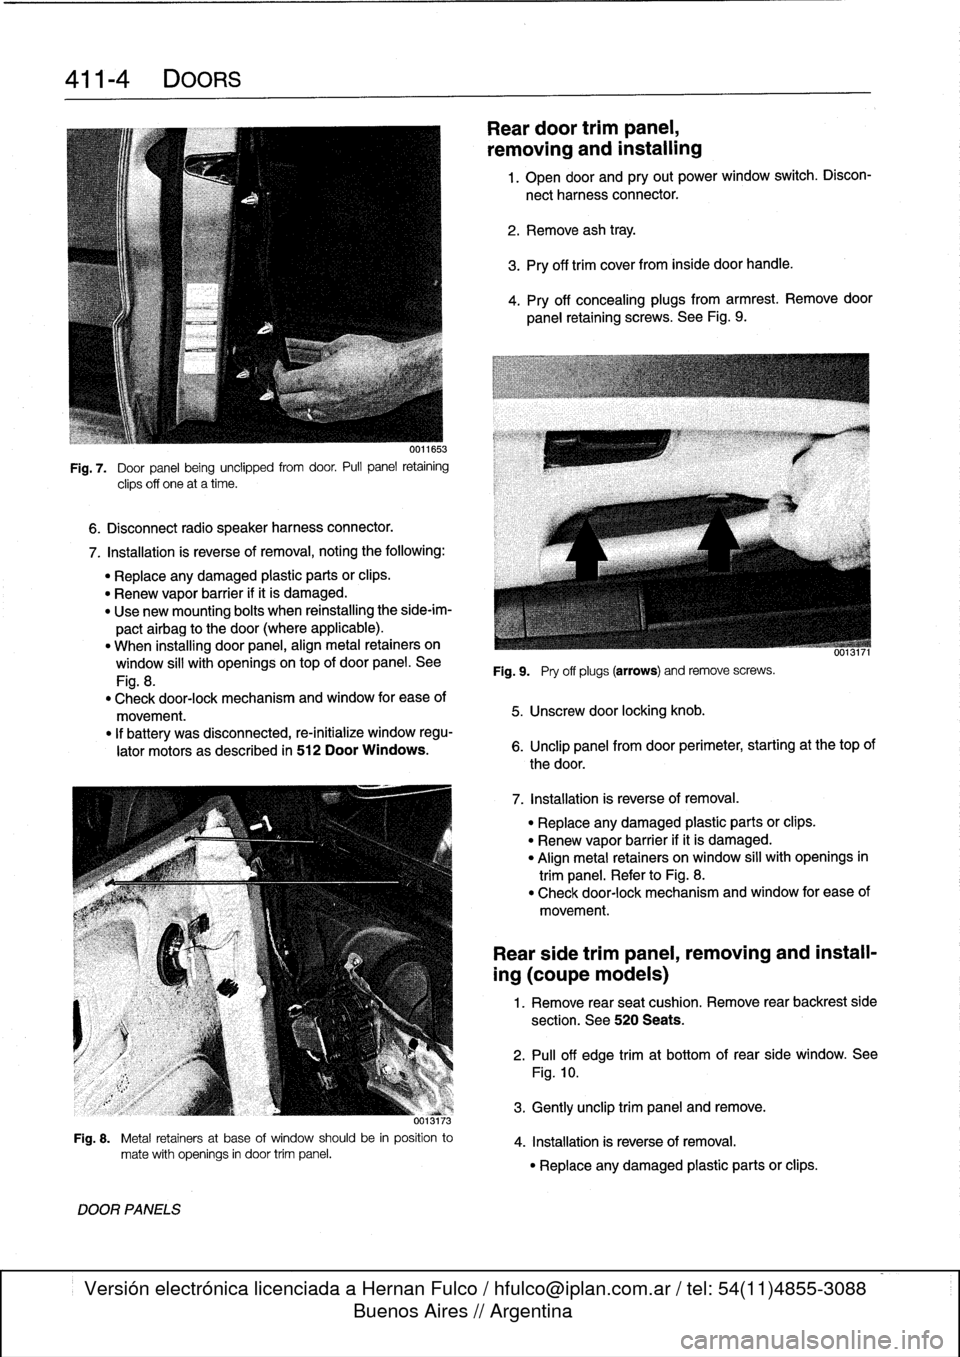 BMW 328i 1998 E36 Workshop Manual 
411-
4
DOORS

6
.
Disconnect
radio
speaker
harness
connector
.

Fig
.
7
.

	

Door
panel
being
unclipped
from
door
.
Pull
panel
retaining

clips
off
one
at
a
time
.

7
.
Installation
is
reverse
of
re